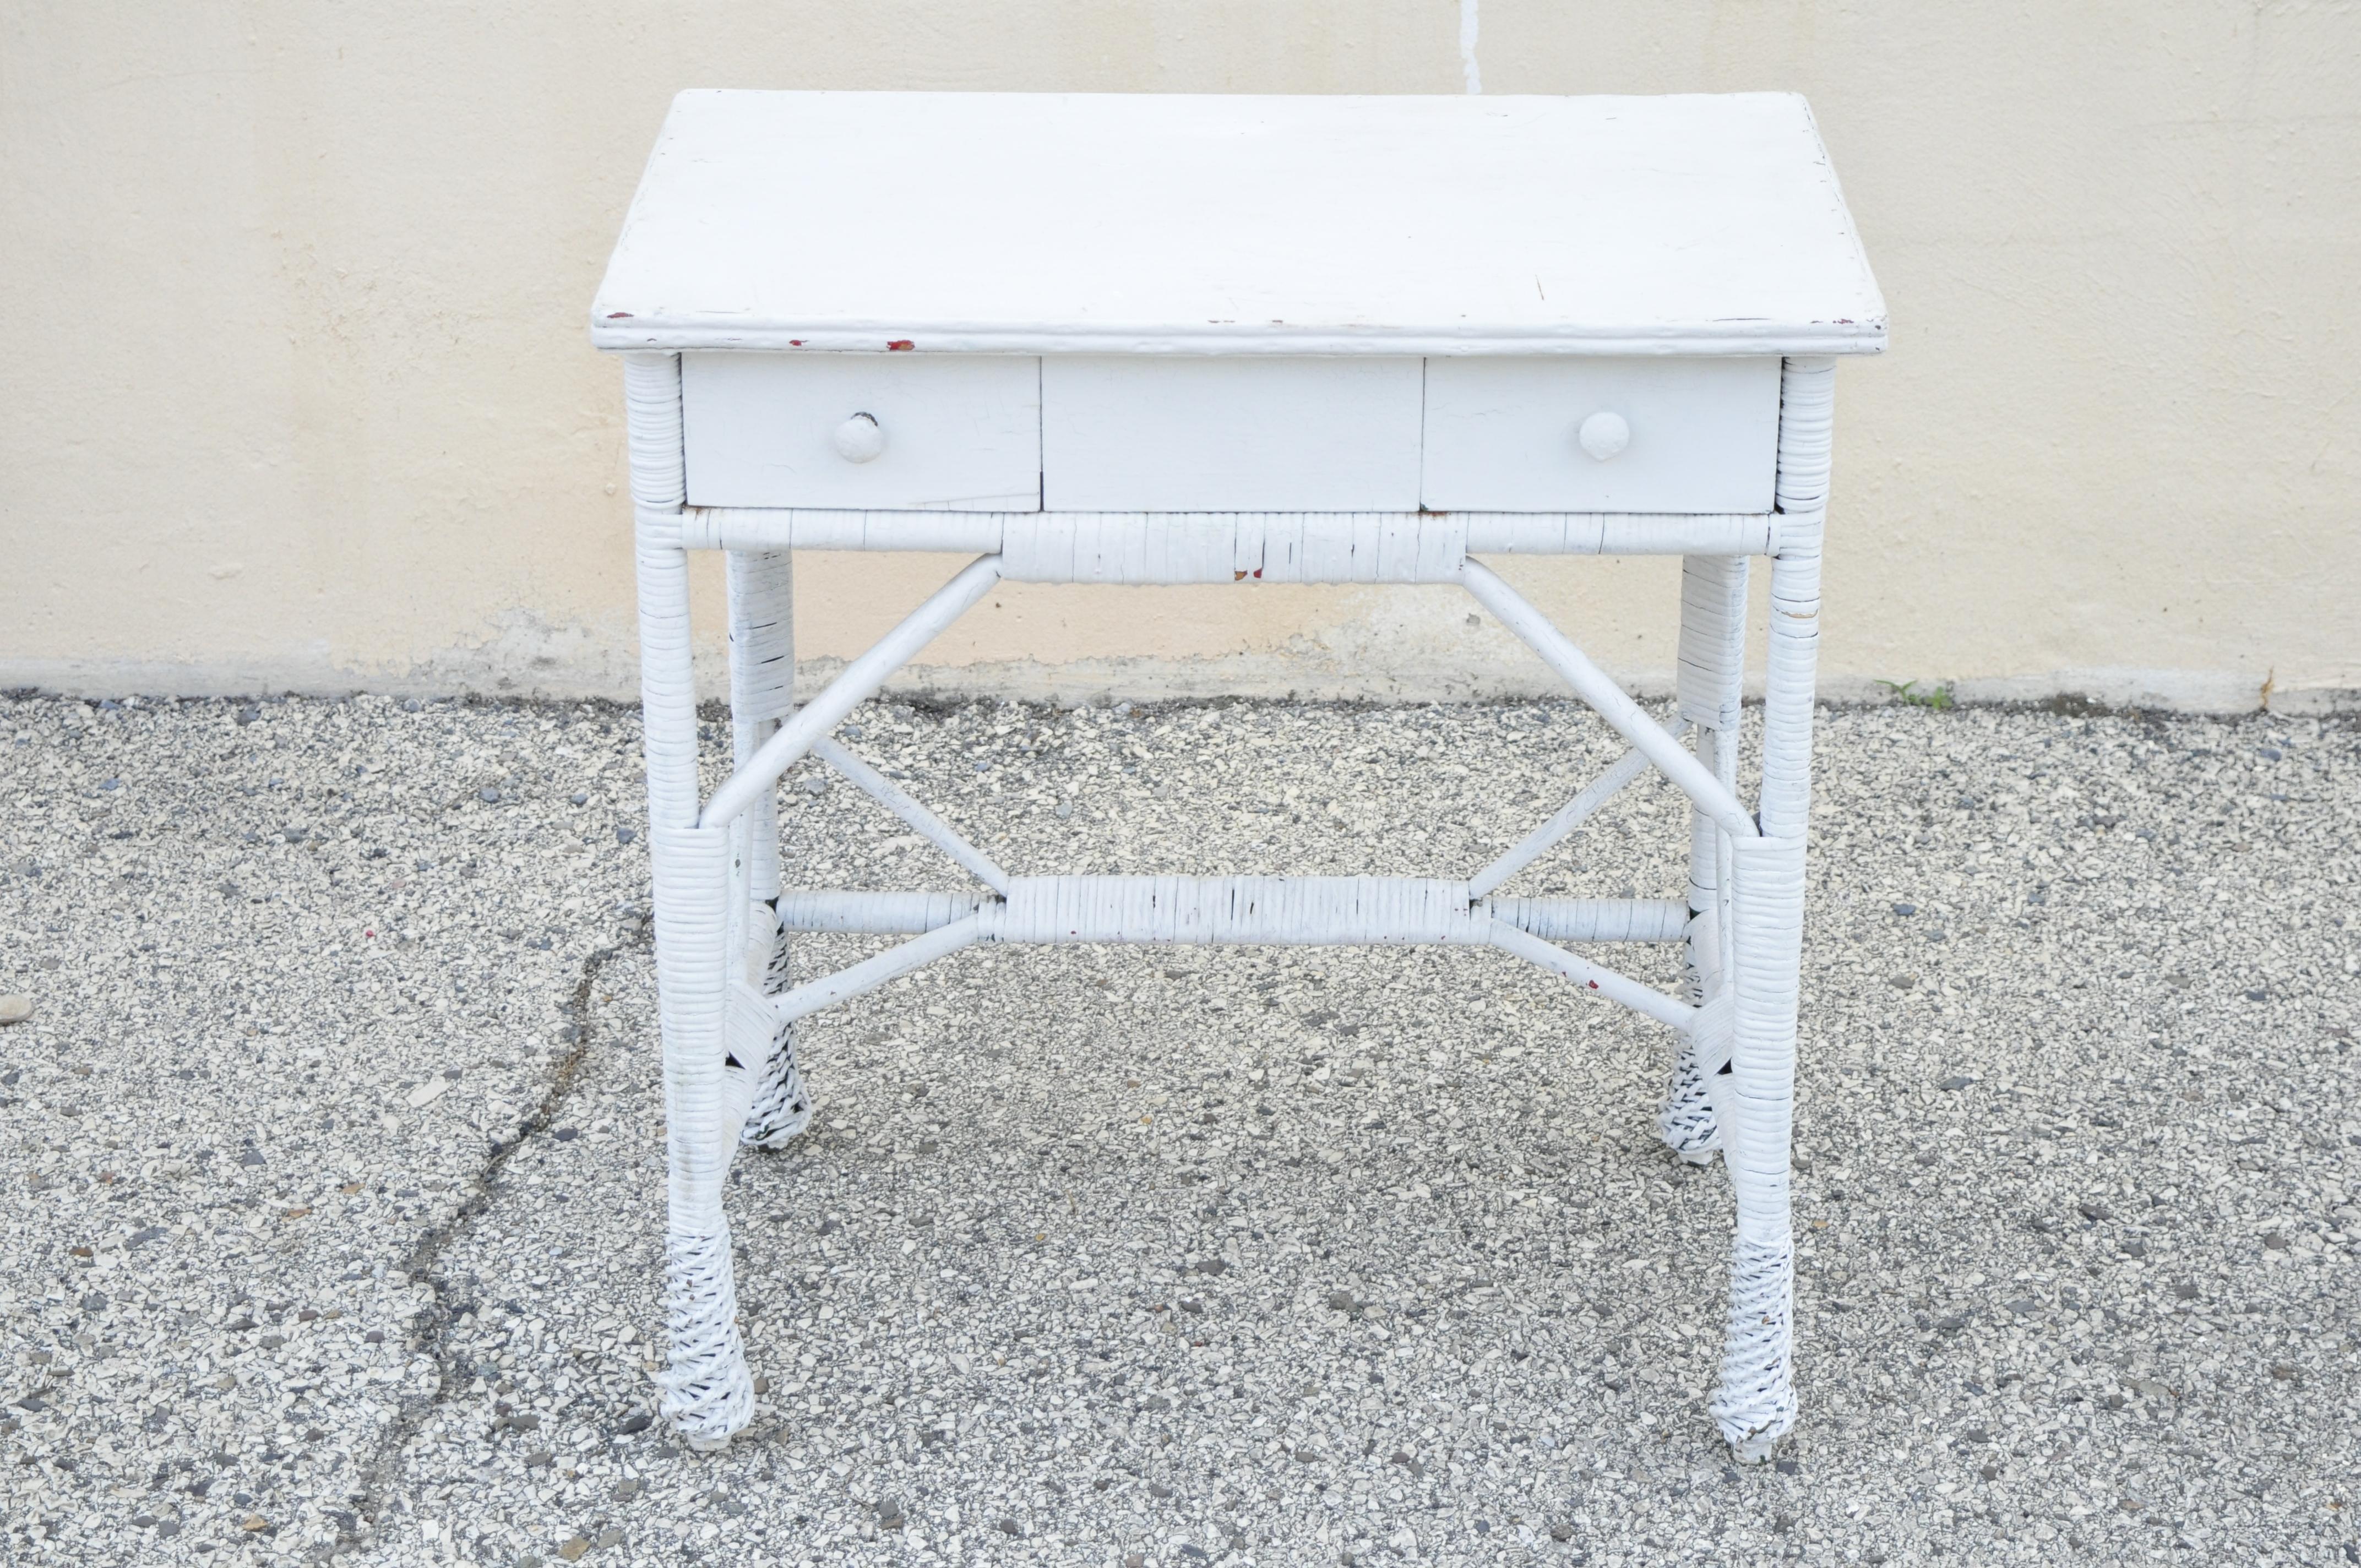 Antique Victorian white wicker rattan small vanity writing desk table 2 drawers. Item features nice petite size, 2 drawers, very nice antique item, quality American craftsmanship, great style and form. Circa Early 1900s. Measurements: 30